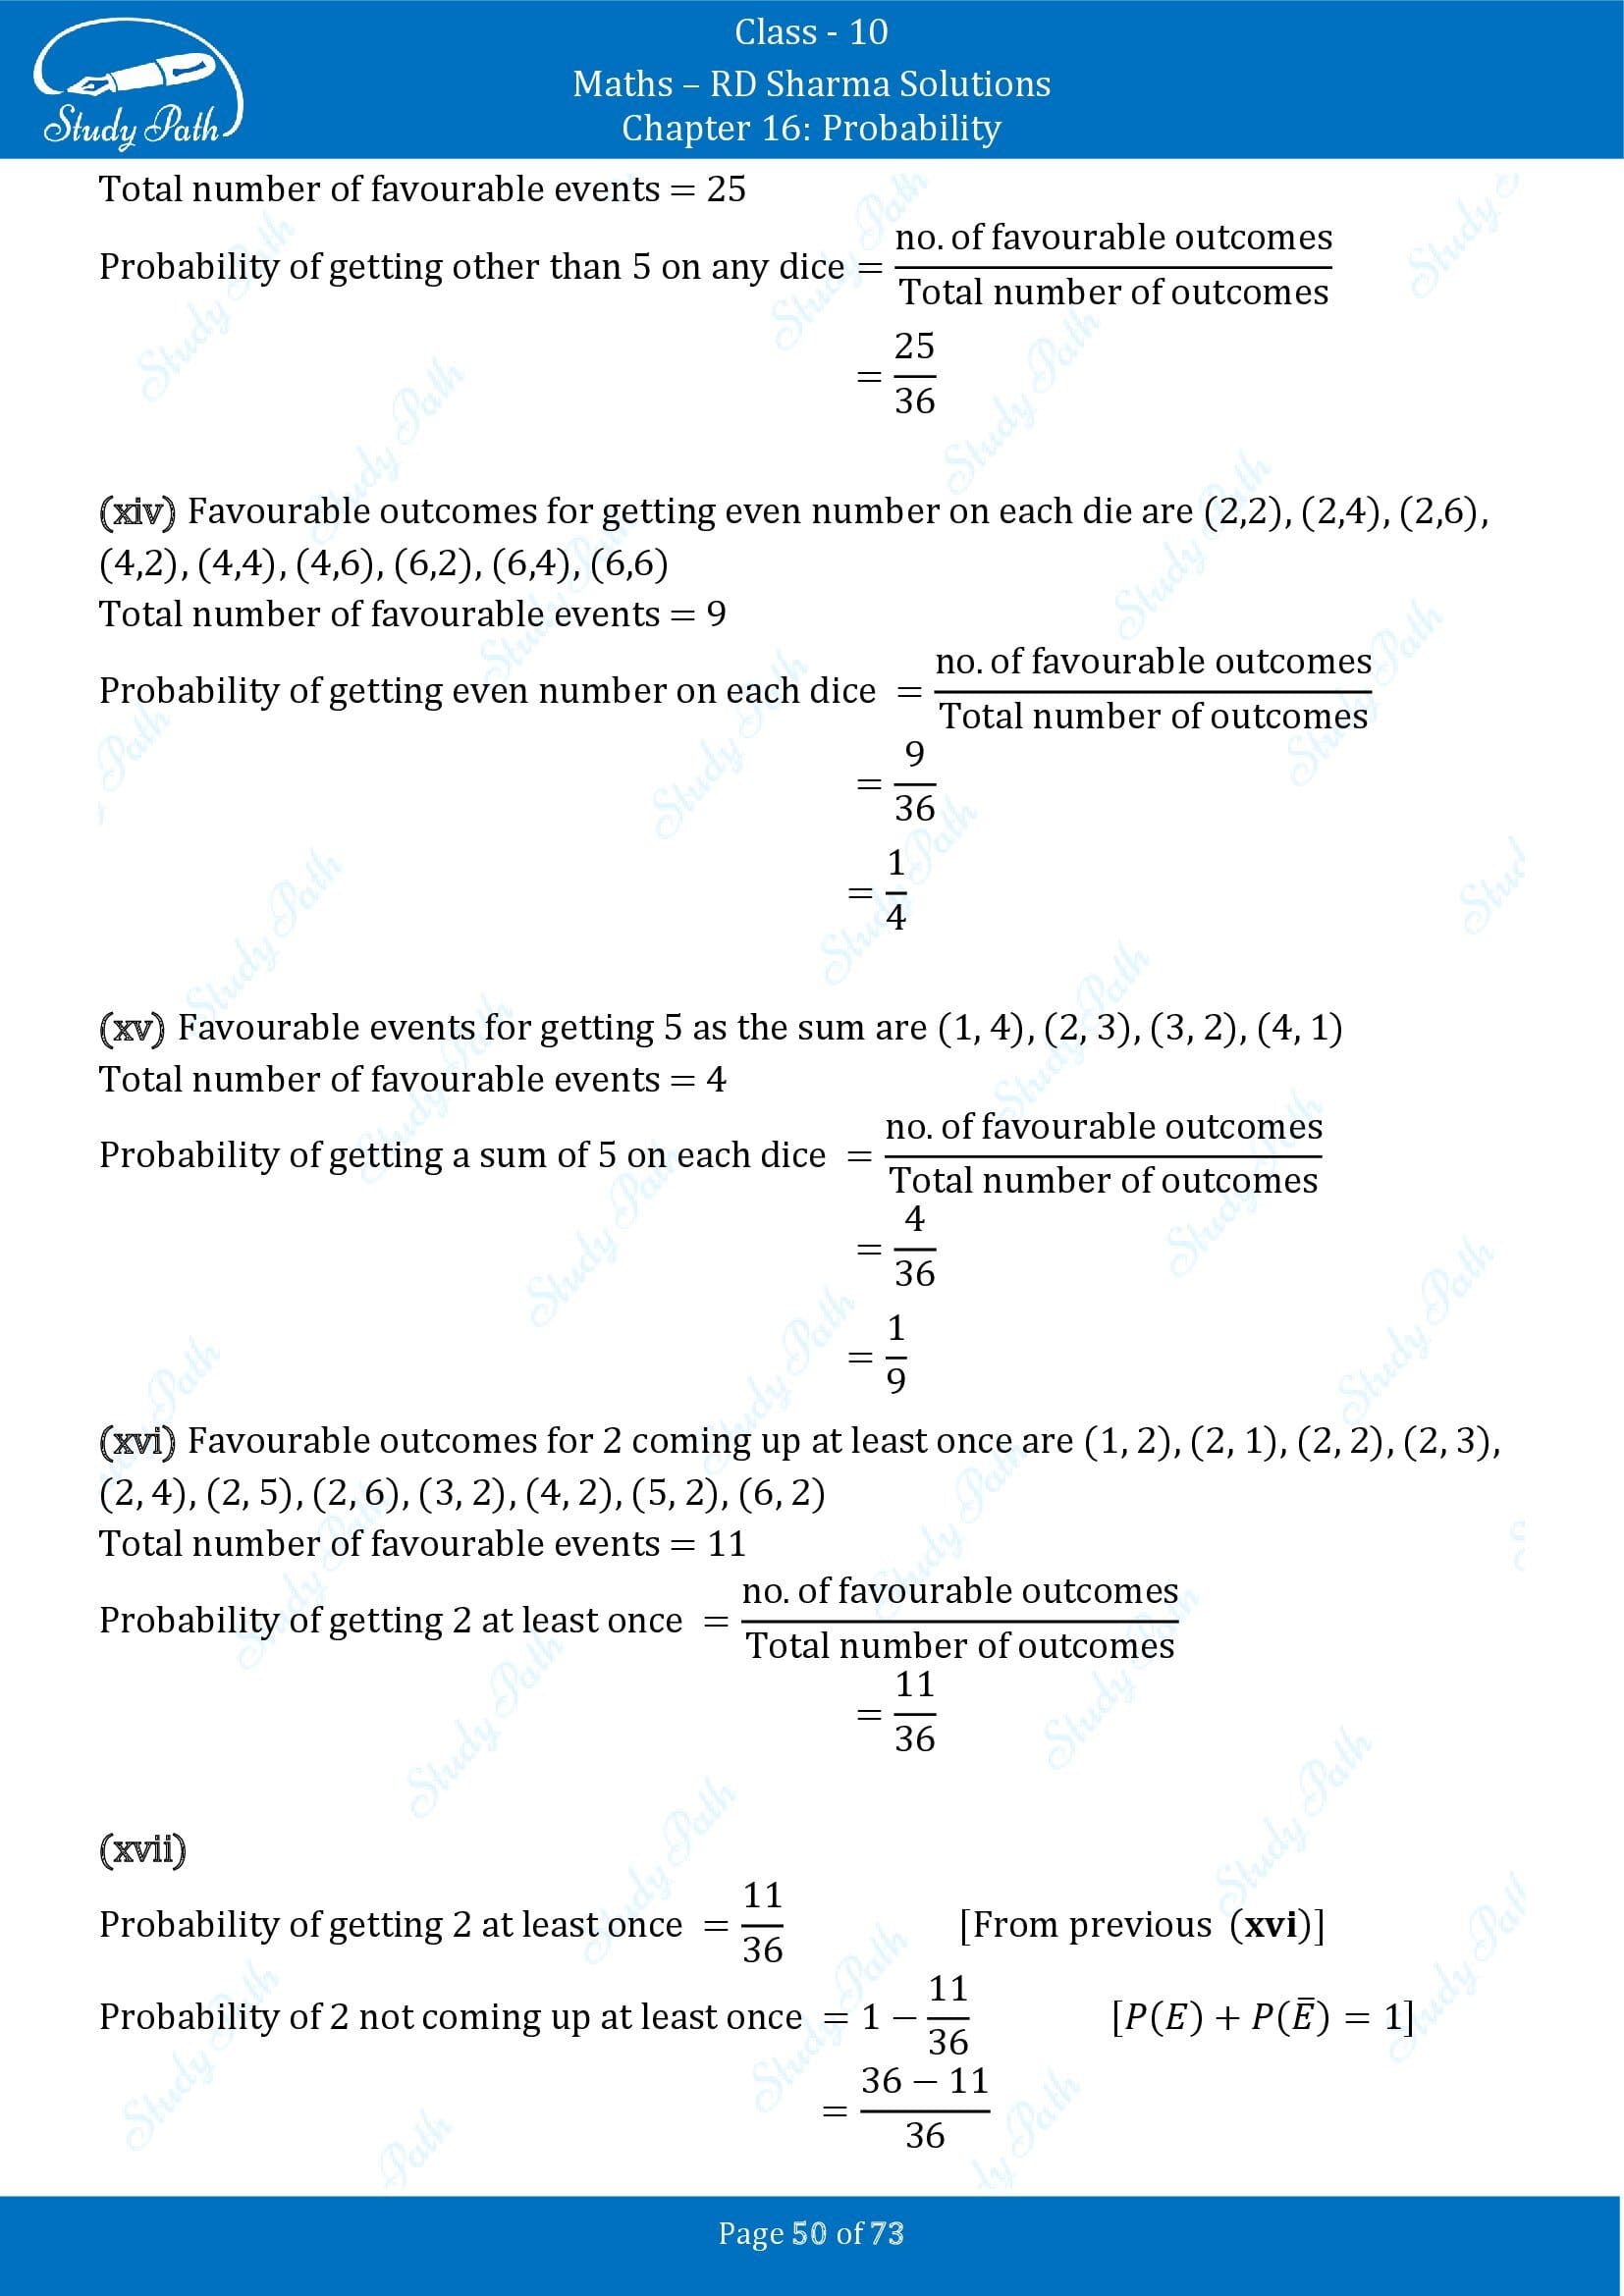 RD Sharma Solutions Class 10 Chapter 16 Probability Exercise 16.1 00050